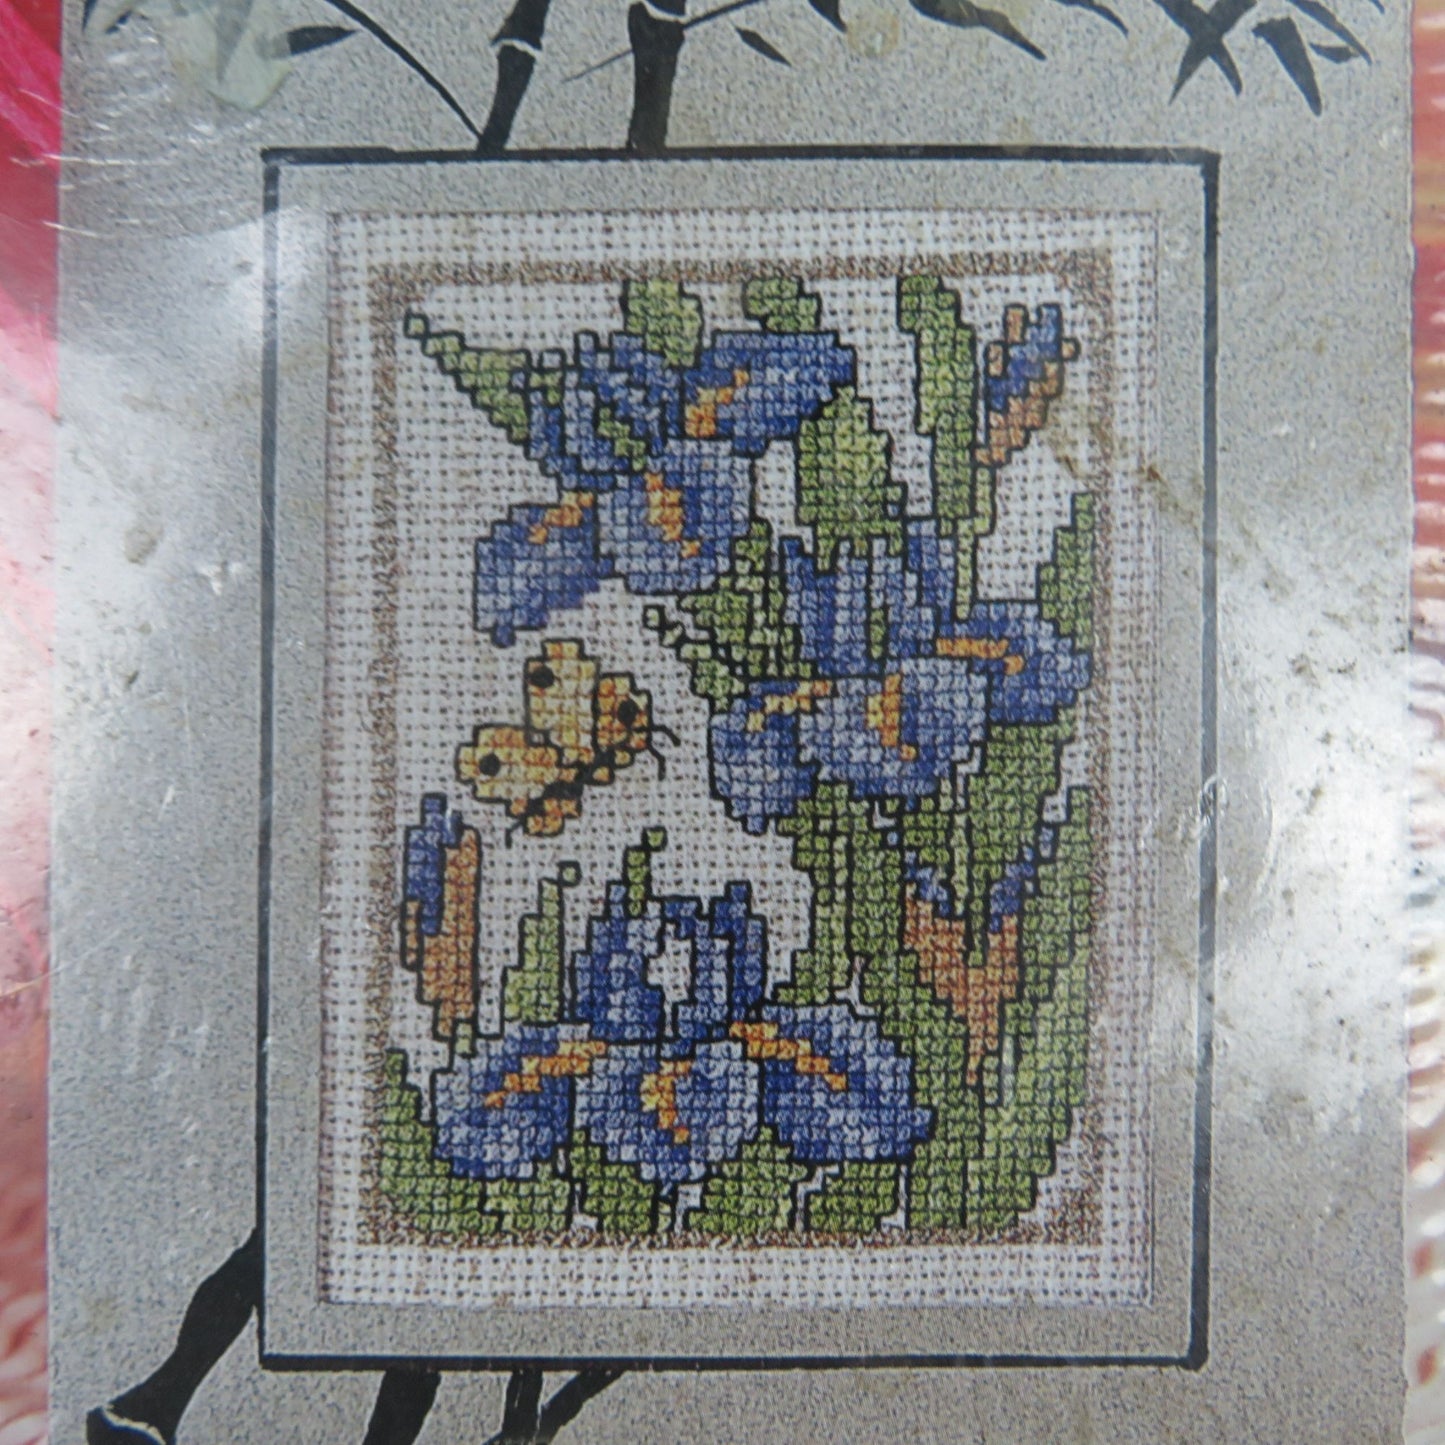 Counted Cross Stitch Greeting Card Kit Iris Flowers Design Works Crafts 838